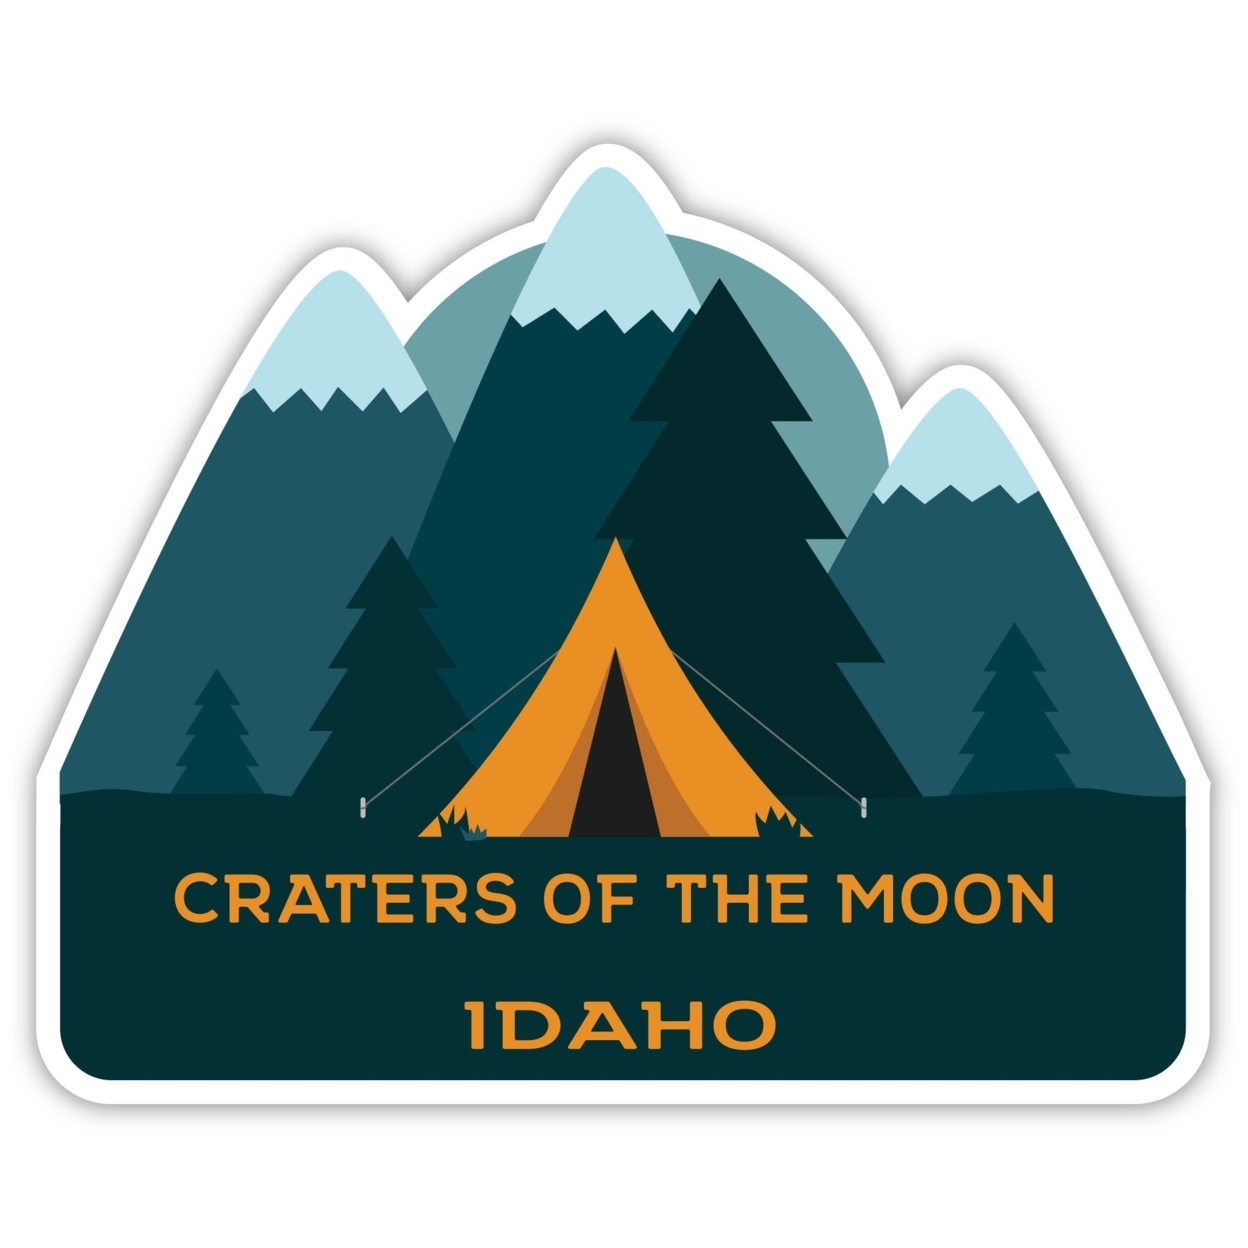 Craters Of The Moon Idaho Souvenir Decorative Stickers (Choose Theme And Size) - Single Unit, 10-Inch, Tent